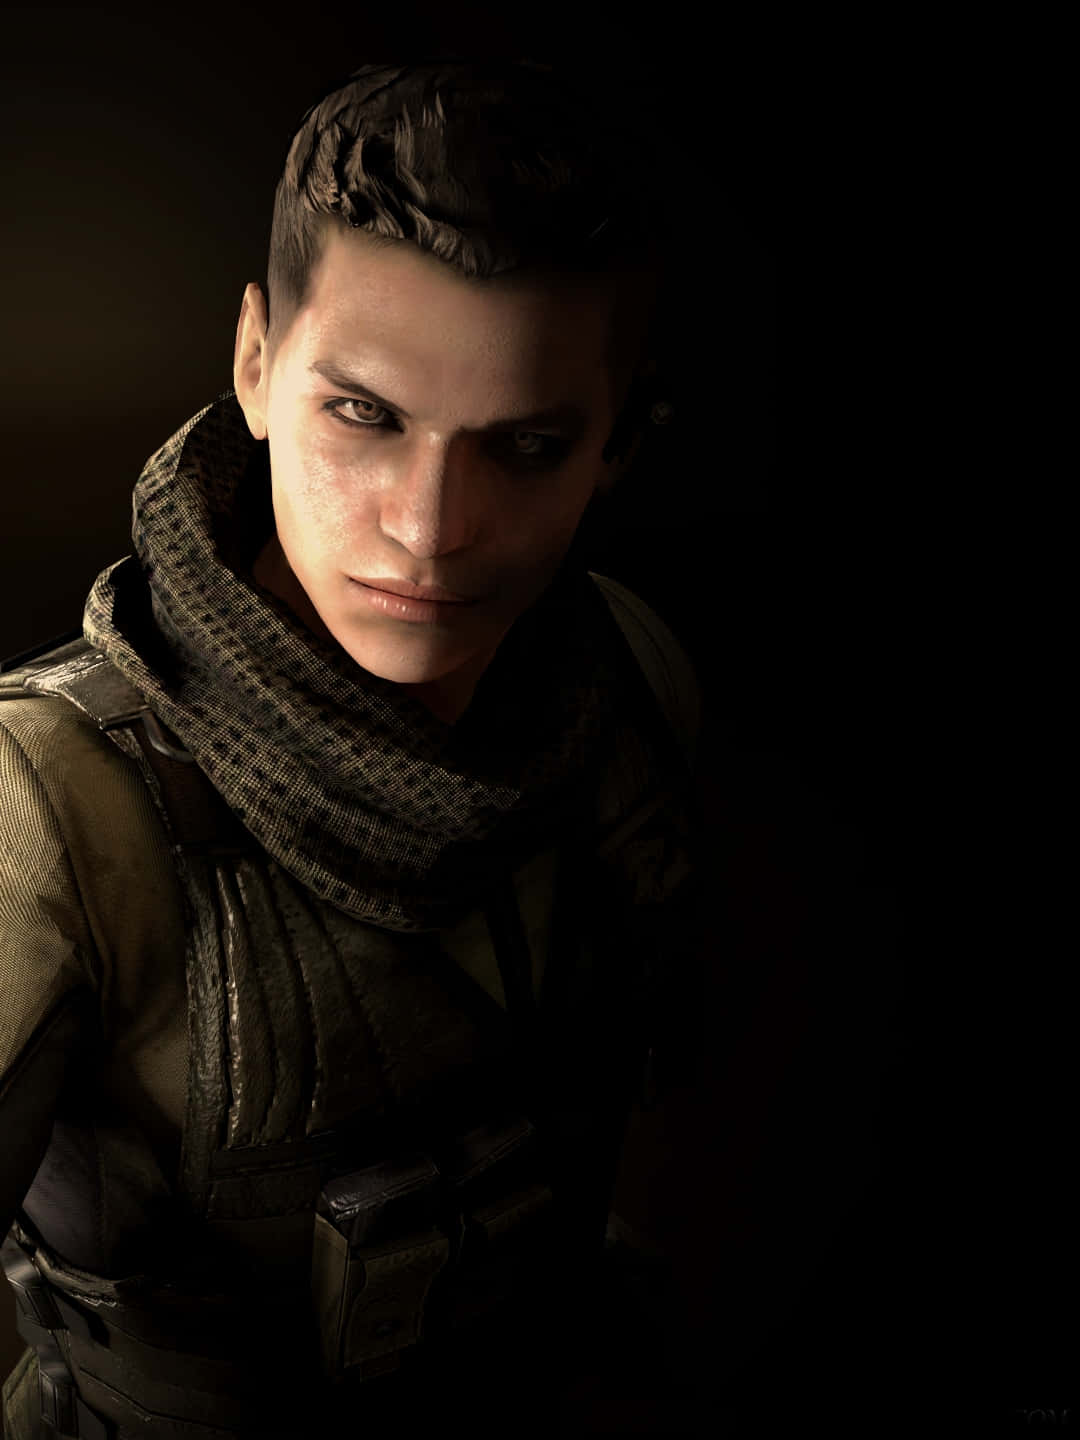 Piers Nivans, The Brave Soldier From Resident Evil, In A Full Action Mode. Wallpaper